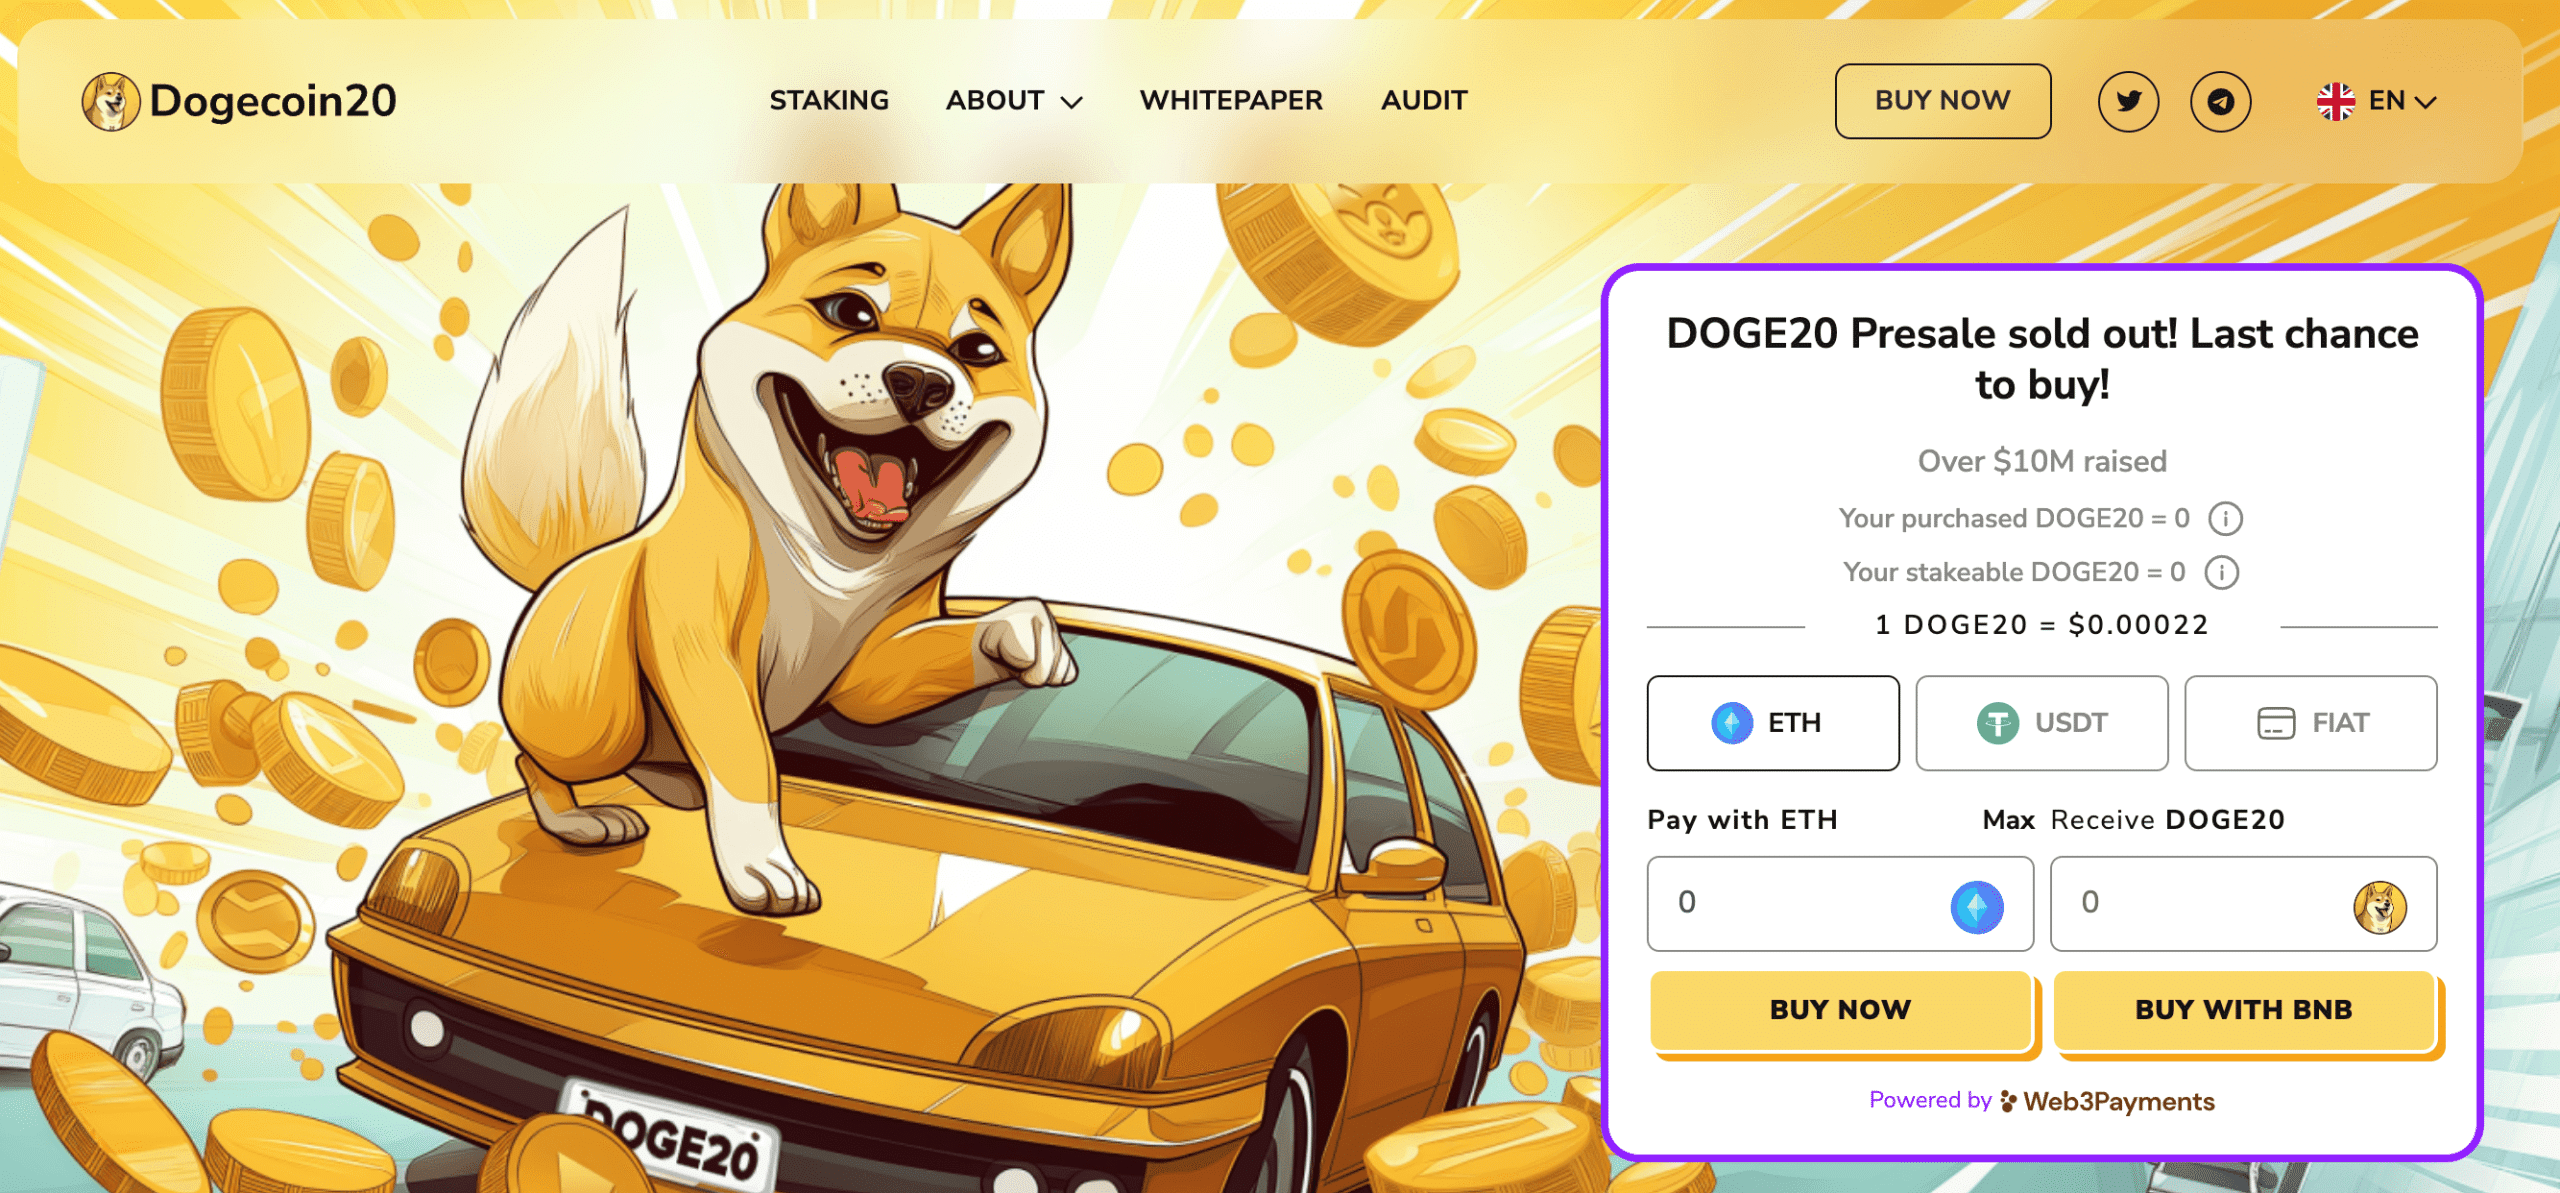 doge20 soldout